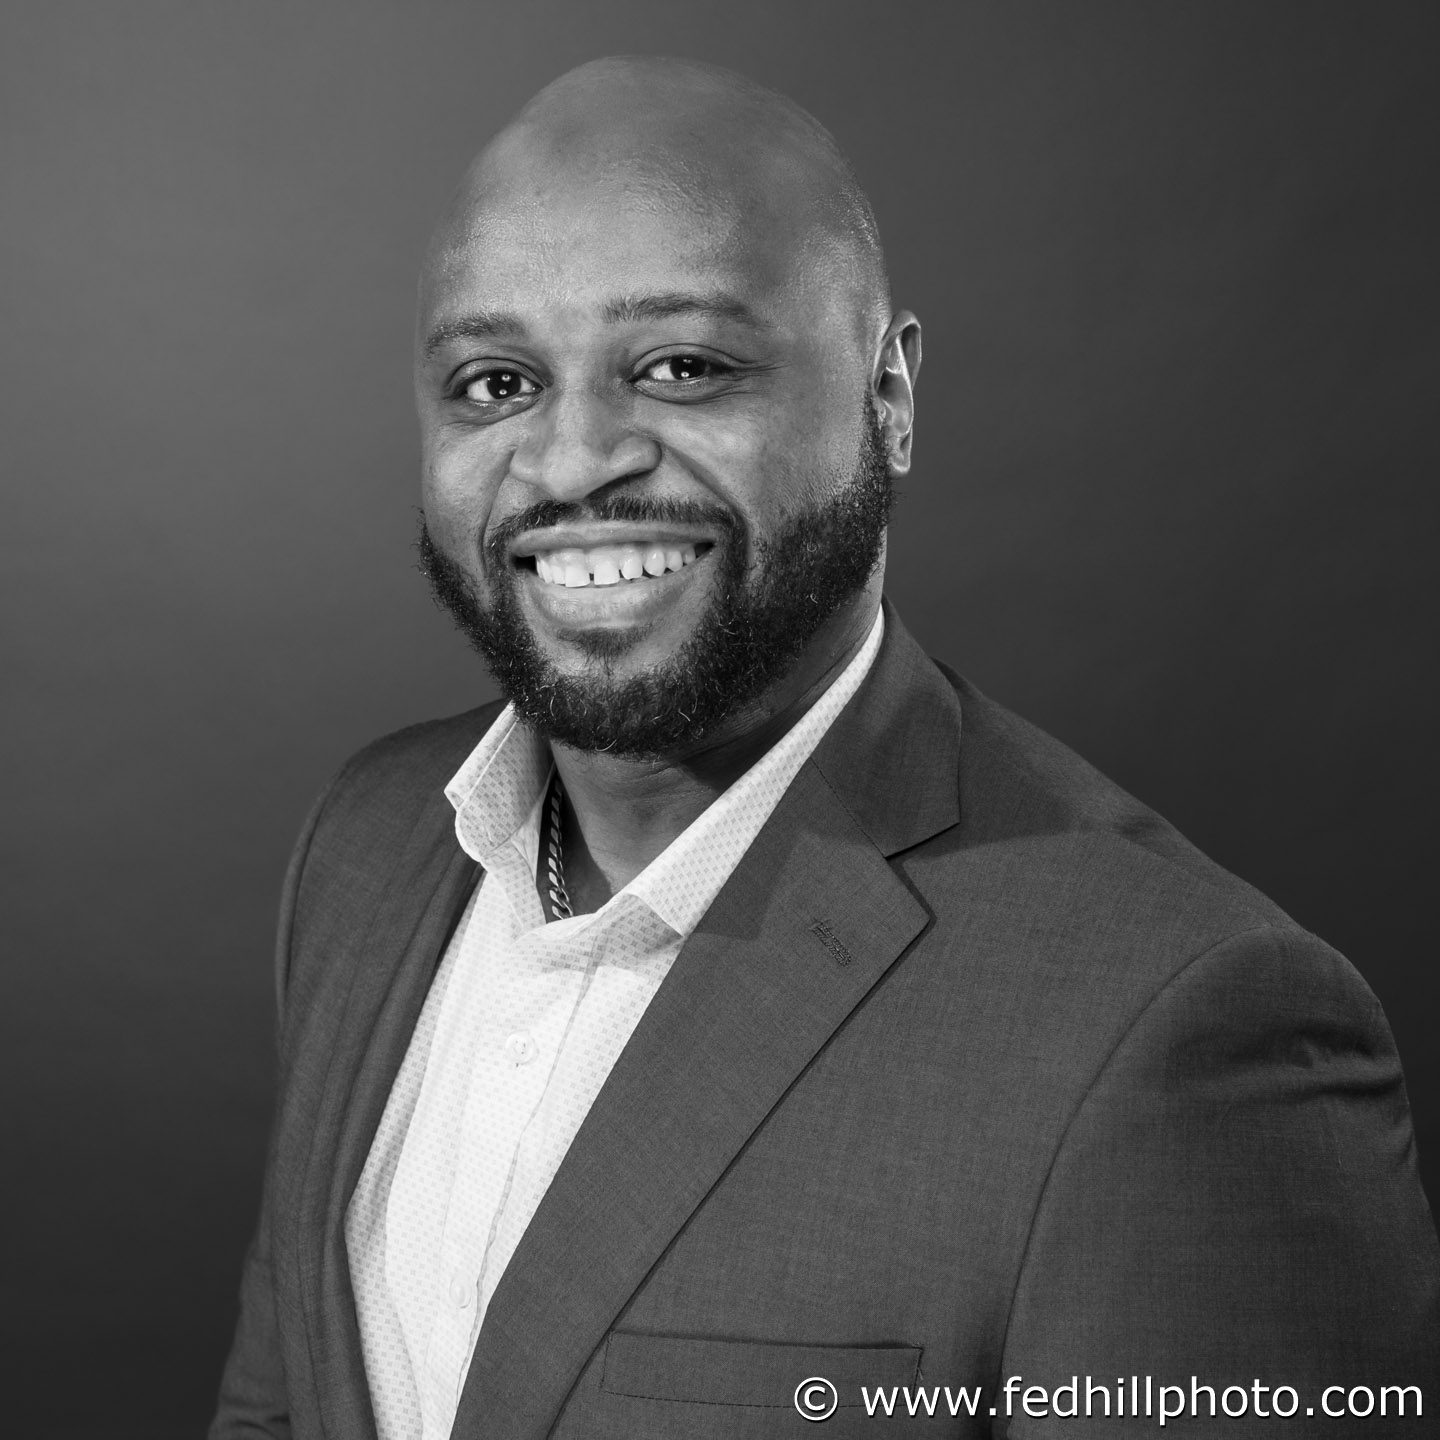 Professional black and white headshot on a solid color background.